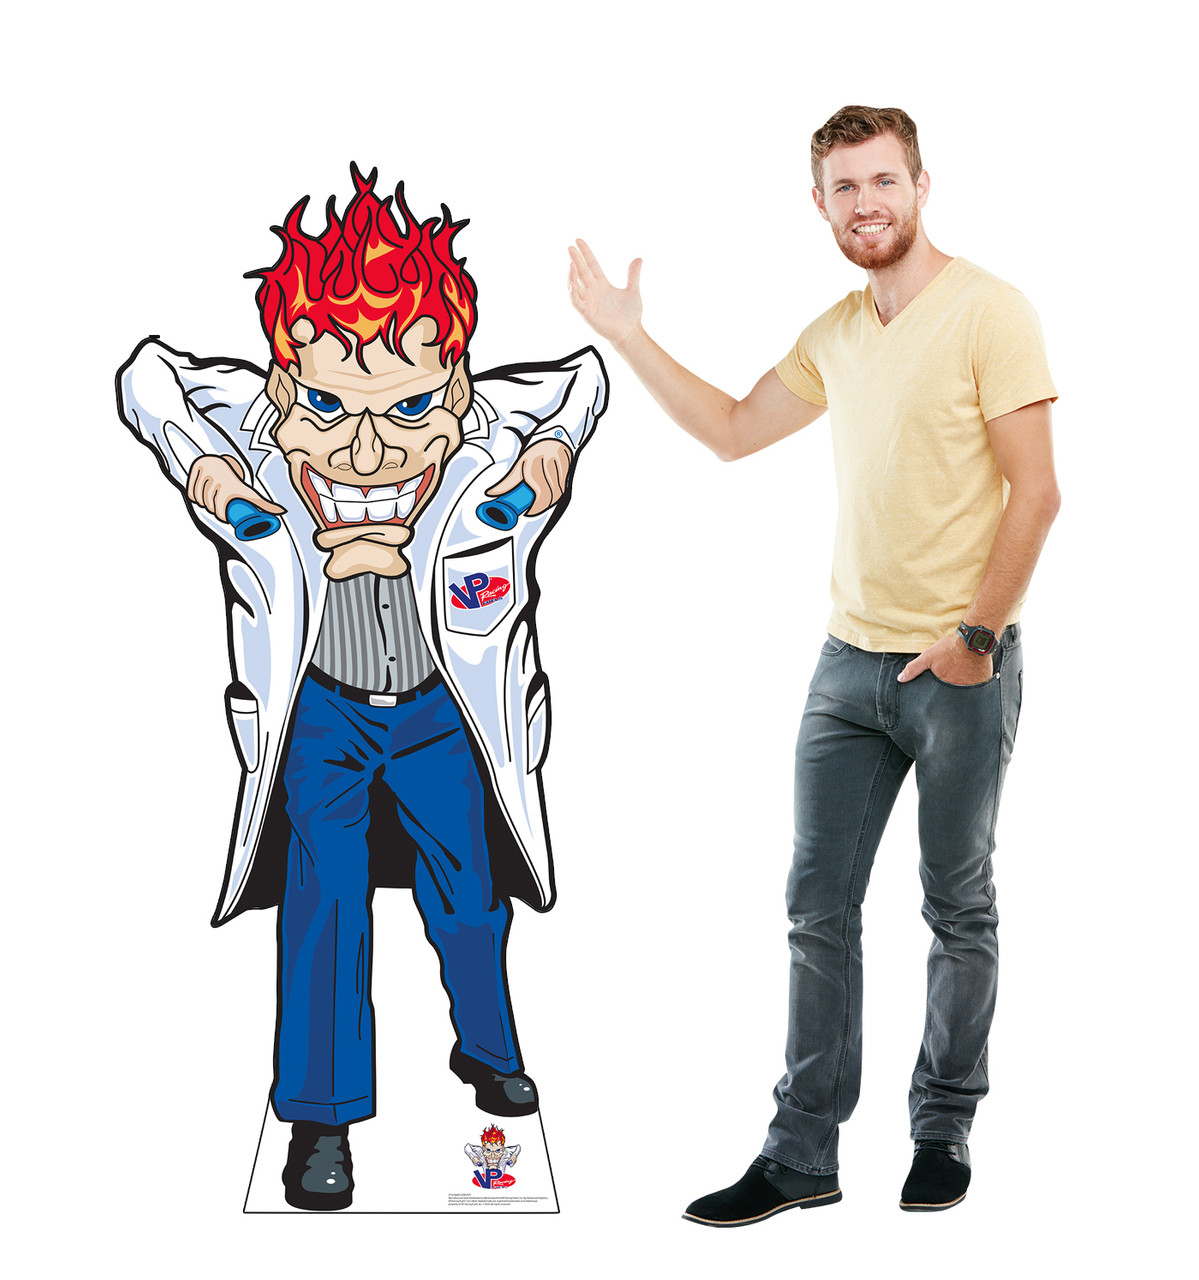 Life-size cardboard standee of a Mad Scientist from VP Racing Fuels with model.